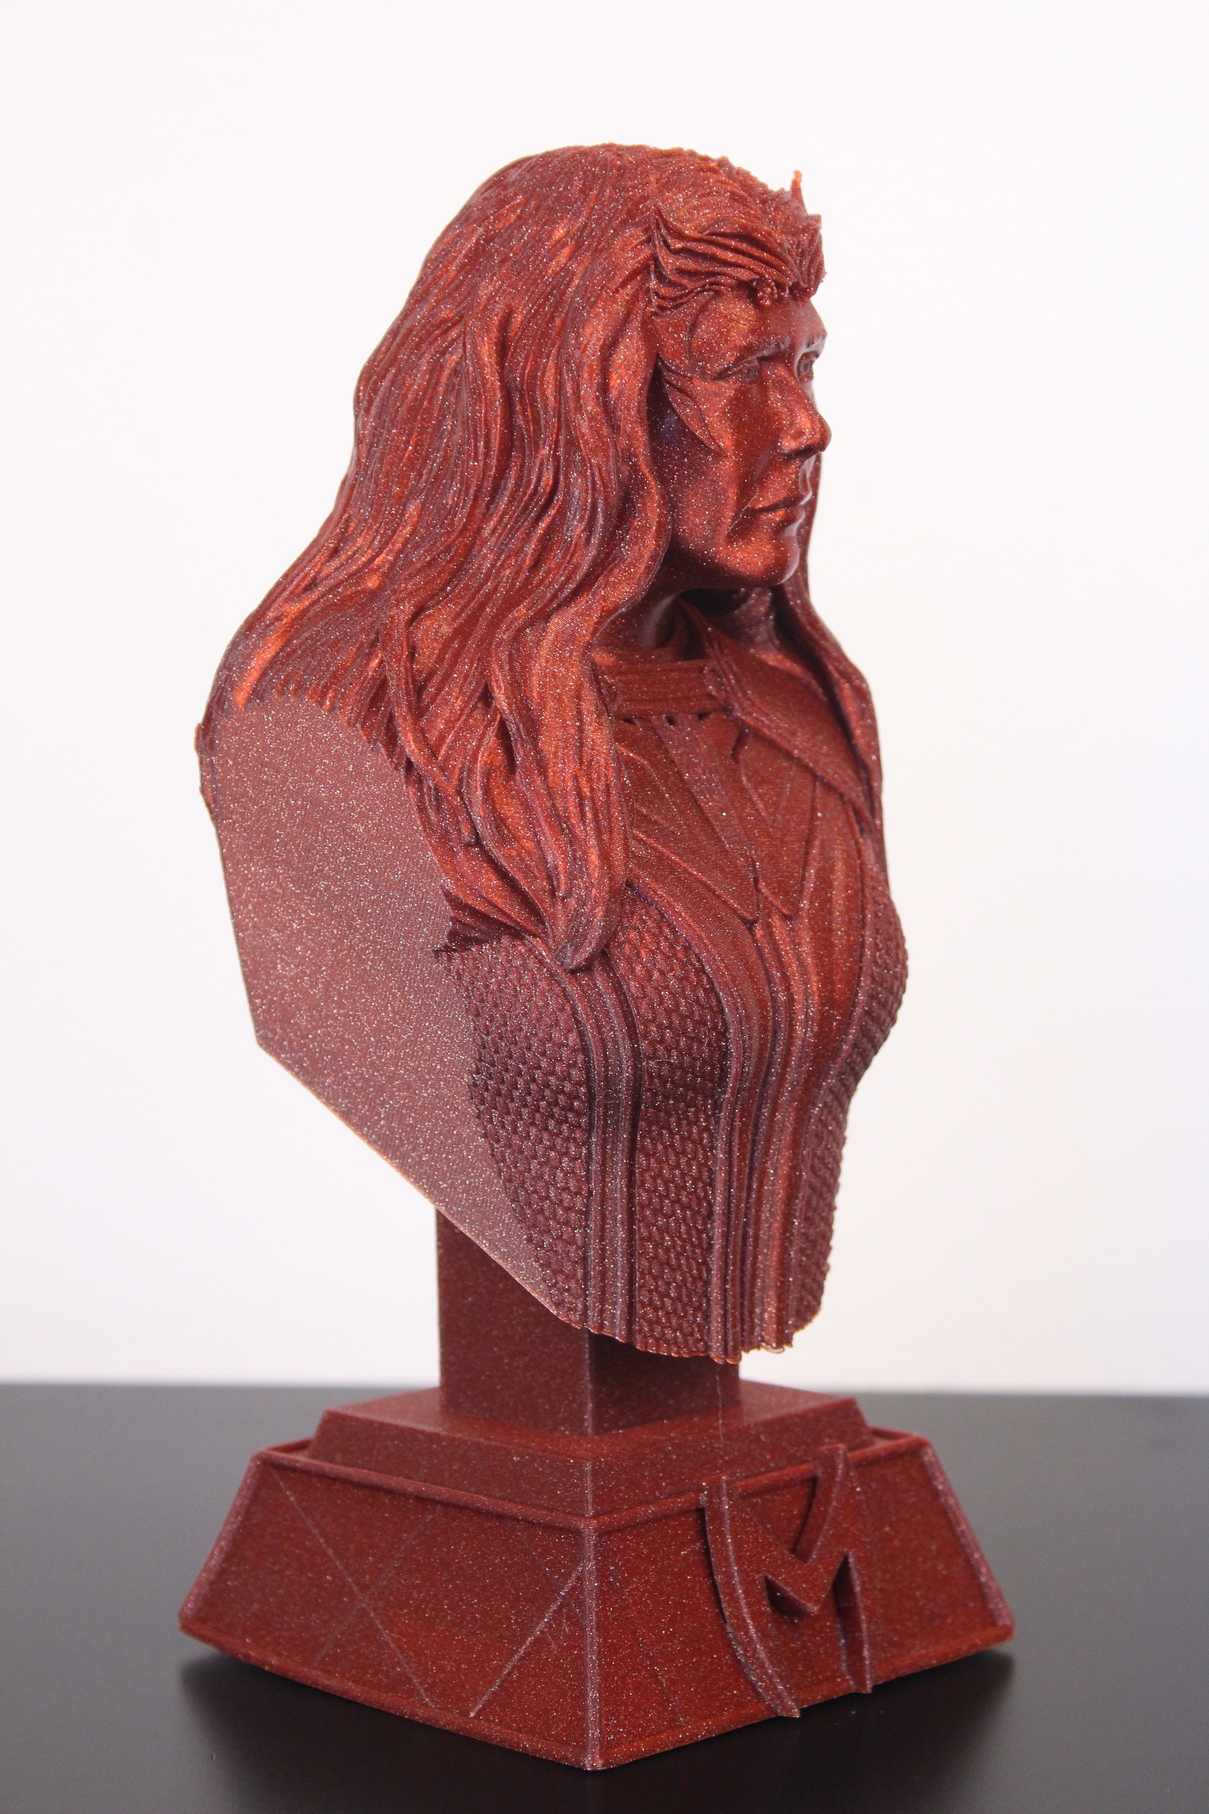 Scarlet Witch printed on the Voxelab Aries 4 | Voxelab Aries Review: A Worthy Upgrade for the Aquila?